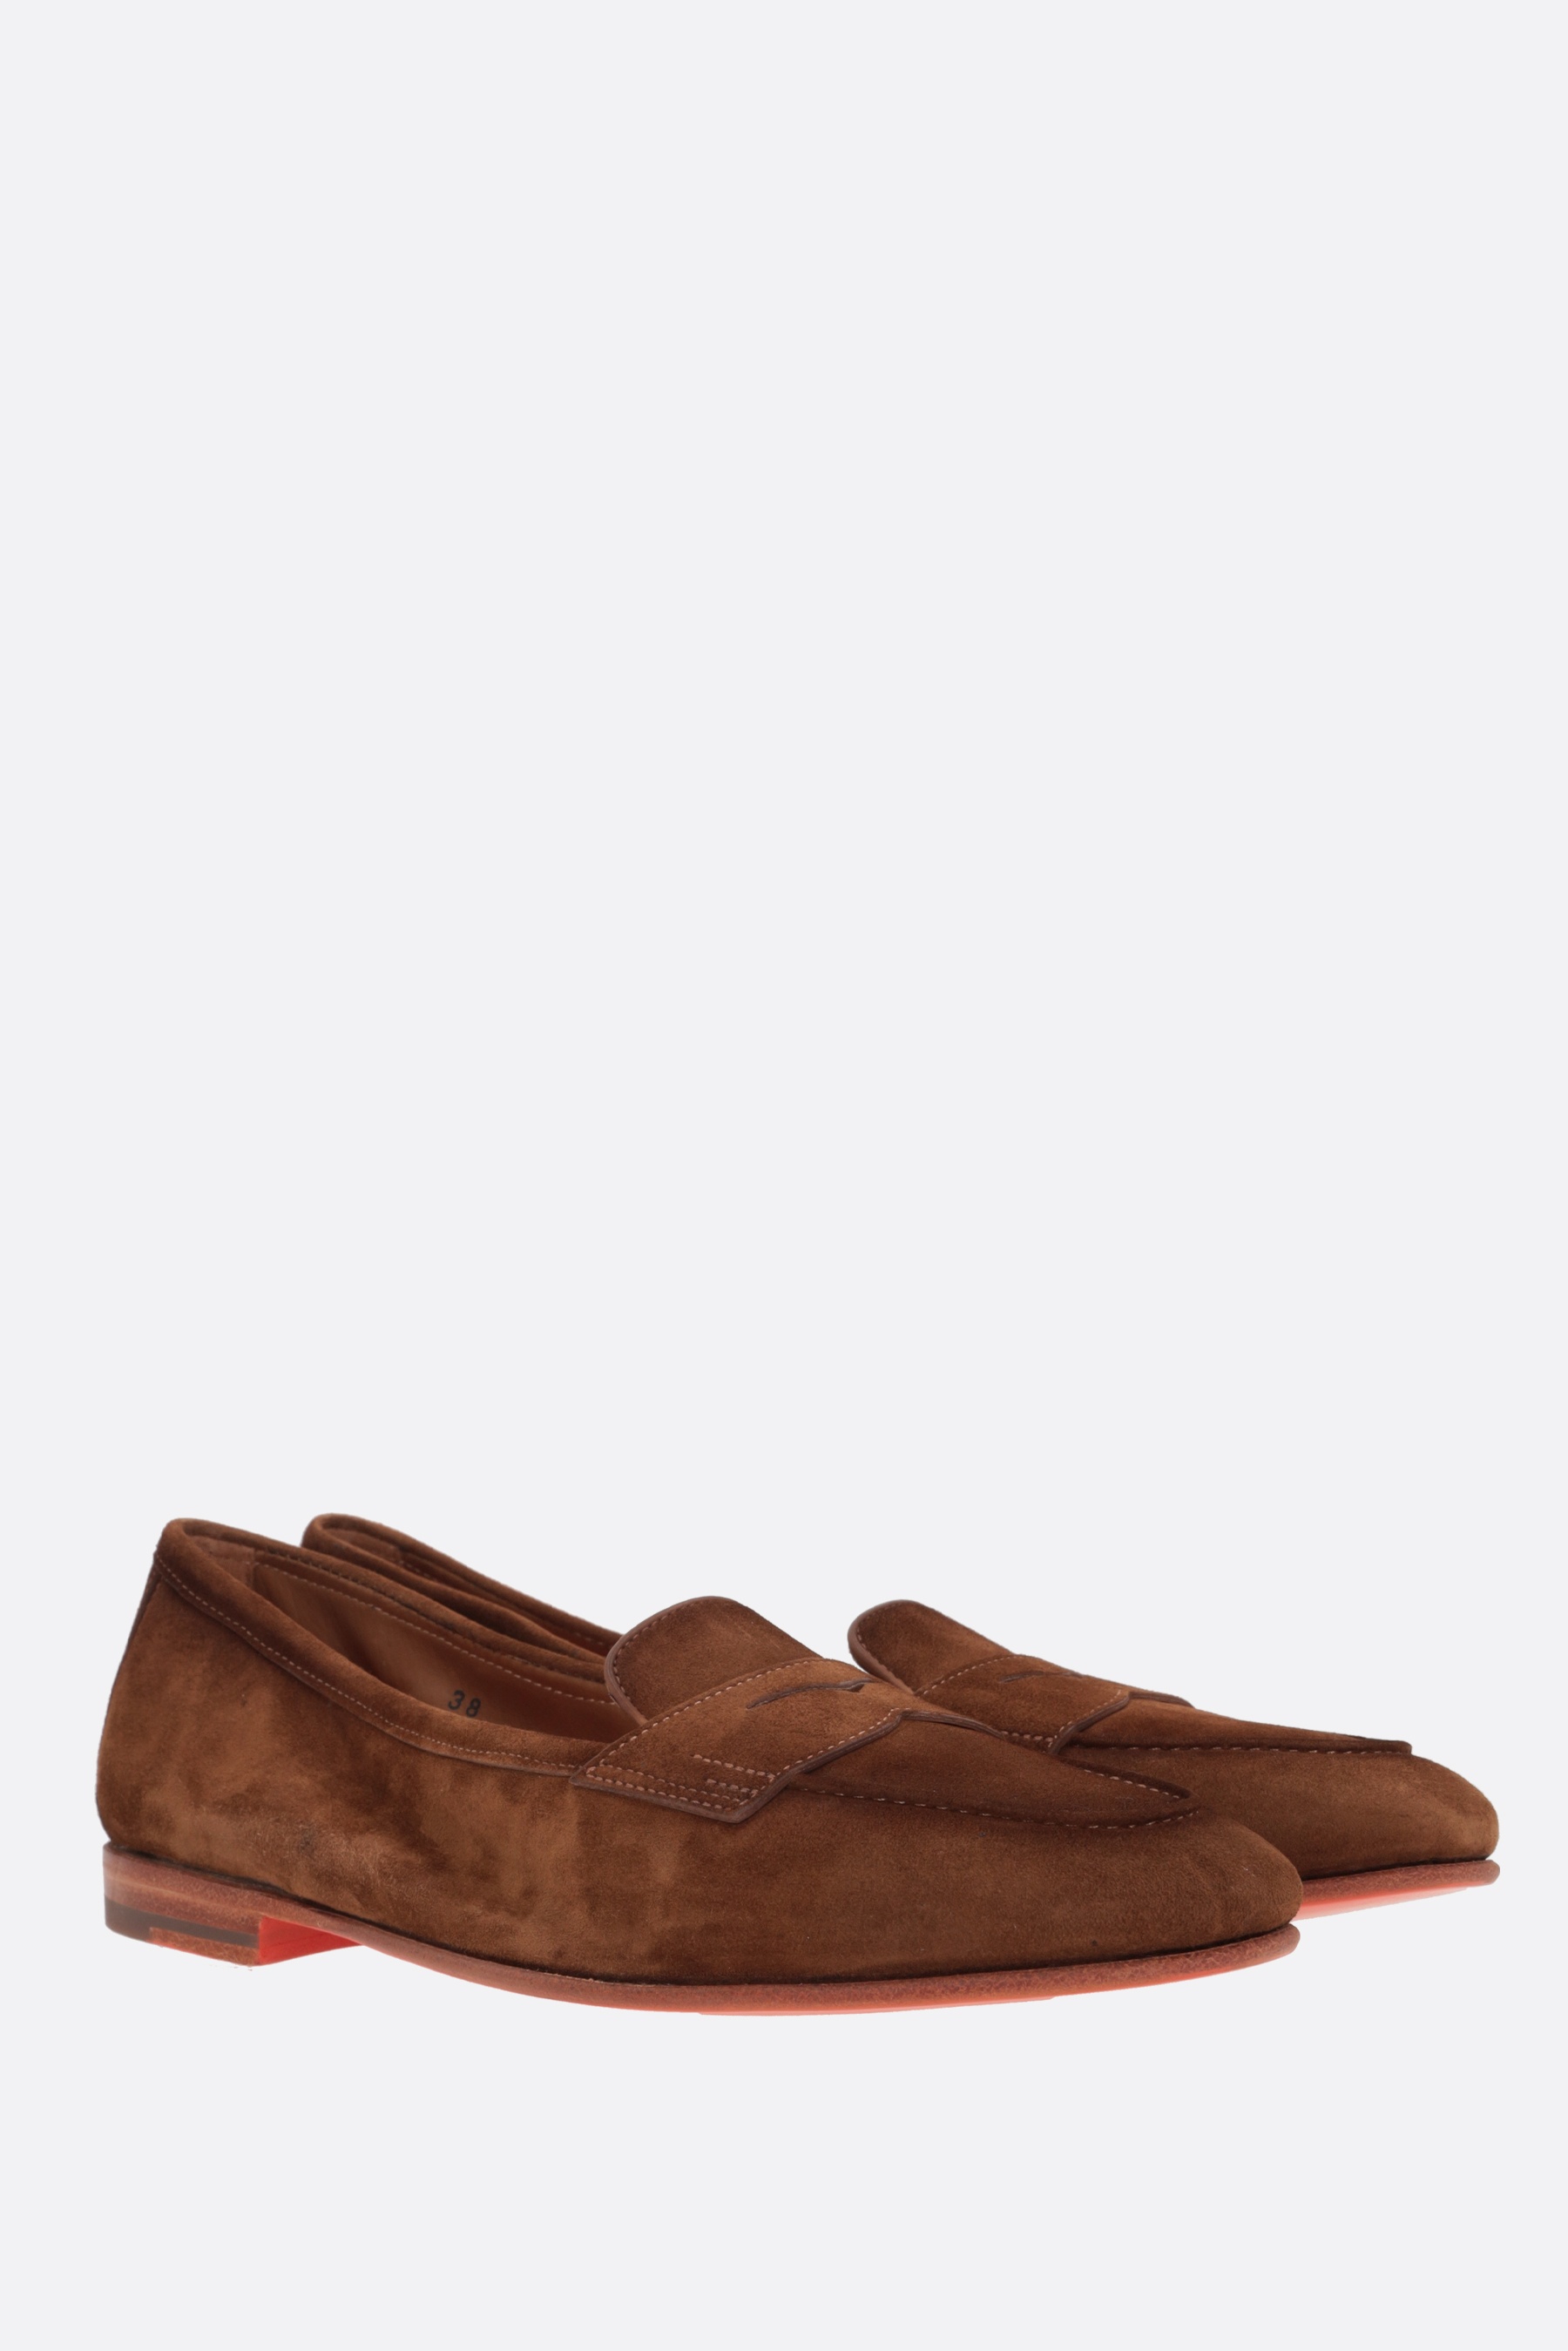 CARLA SUEDE PENNY LOAFERS - 2